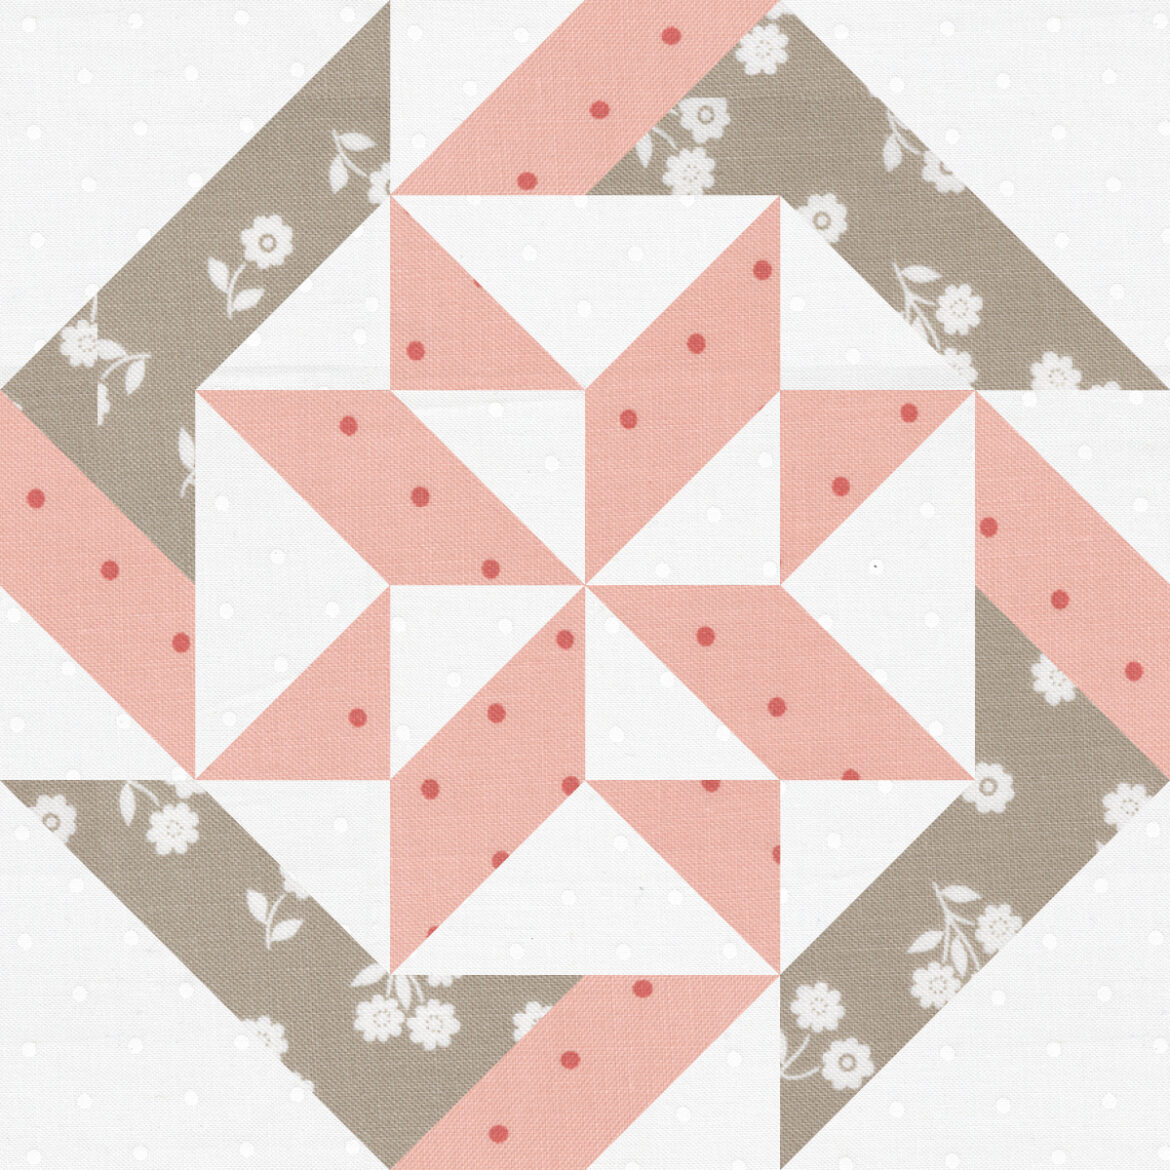 Sewcialites 2 free block of the week. Block 13 is "Innovate" by Doug Leko of Antler Quilt Designs. Fabric is Country Rose by Lella Boutique for Moda. Download the free block pattern here.